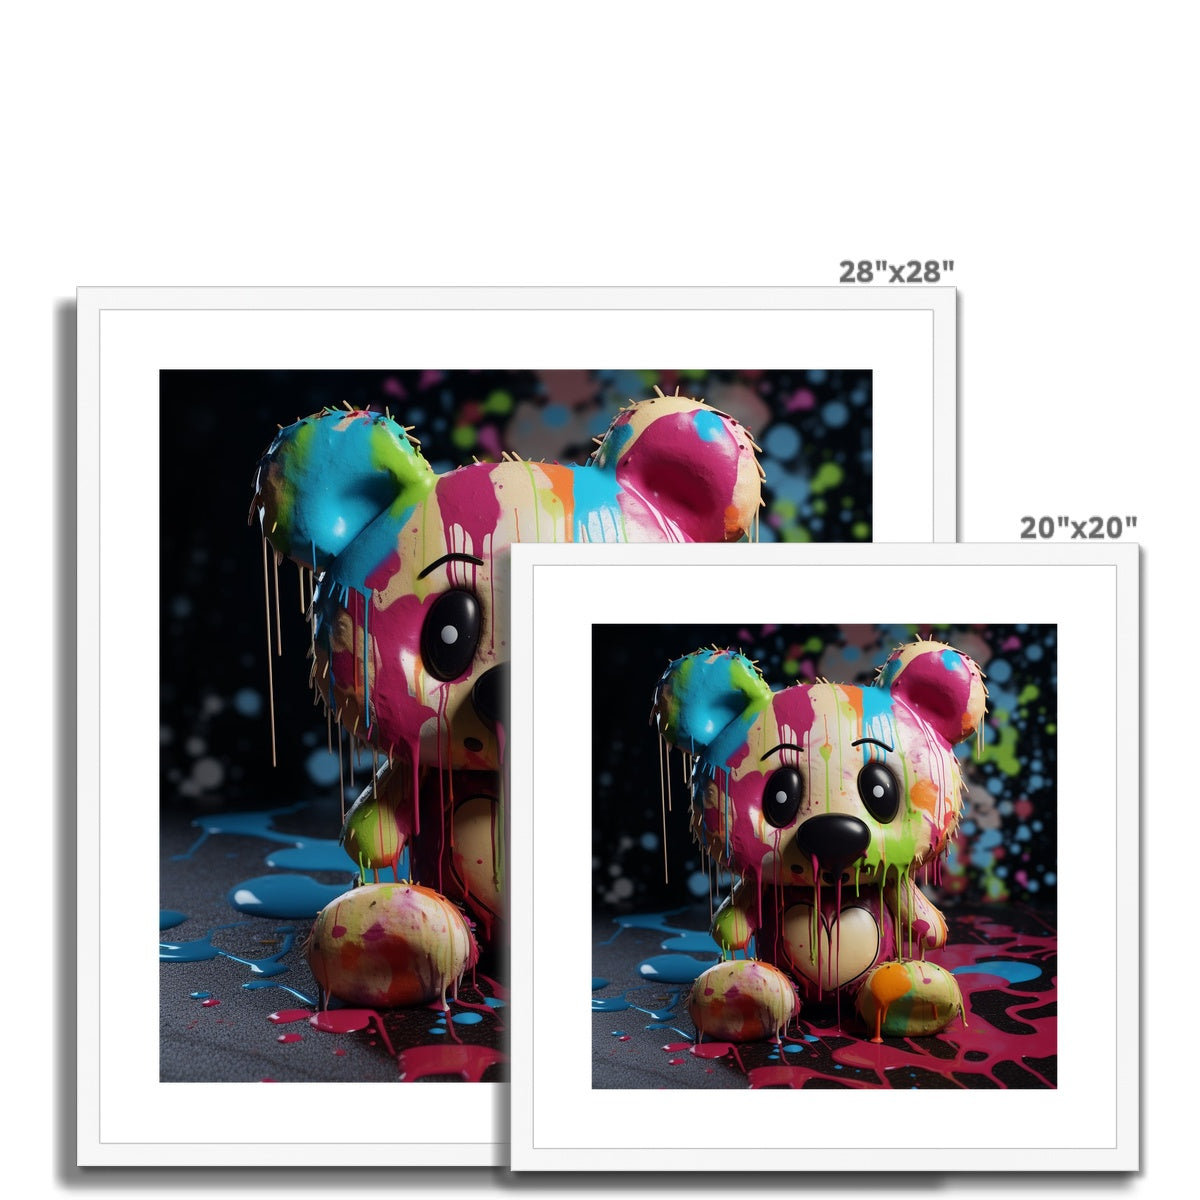 Teddy Edition: Limited Edition Framed & Mounted Print